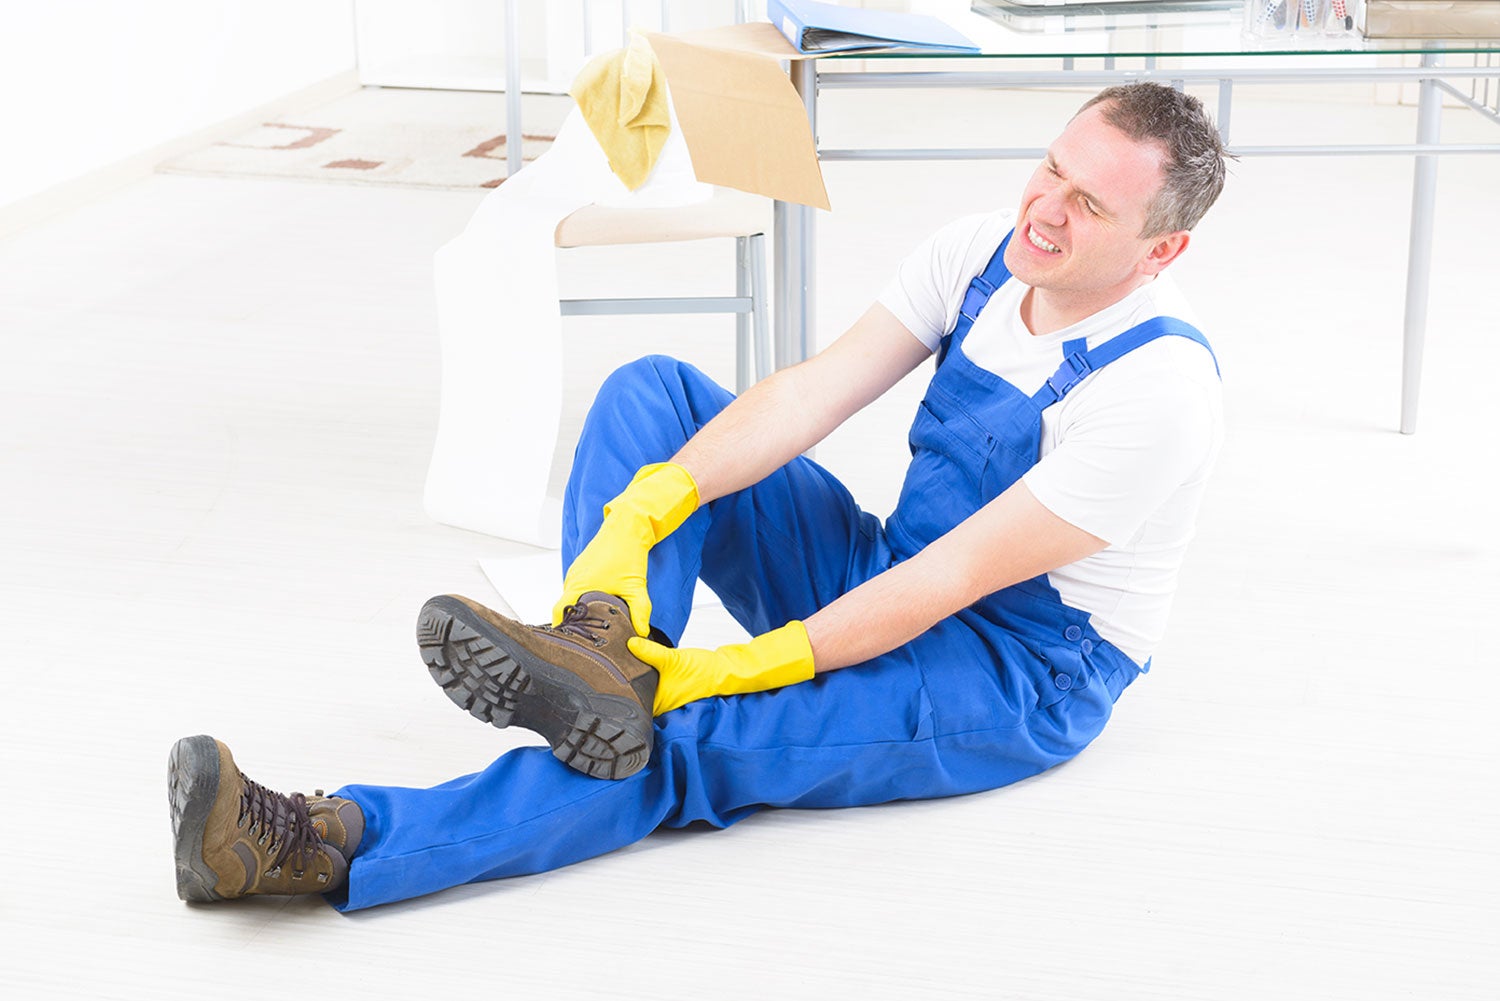 Attorney What Benefits Are California Workers Eligible for Through Workers’ Compensation?